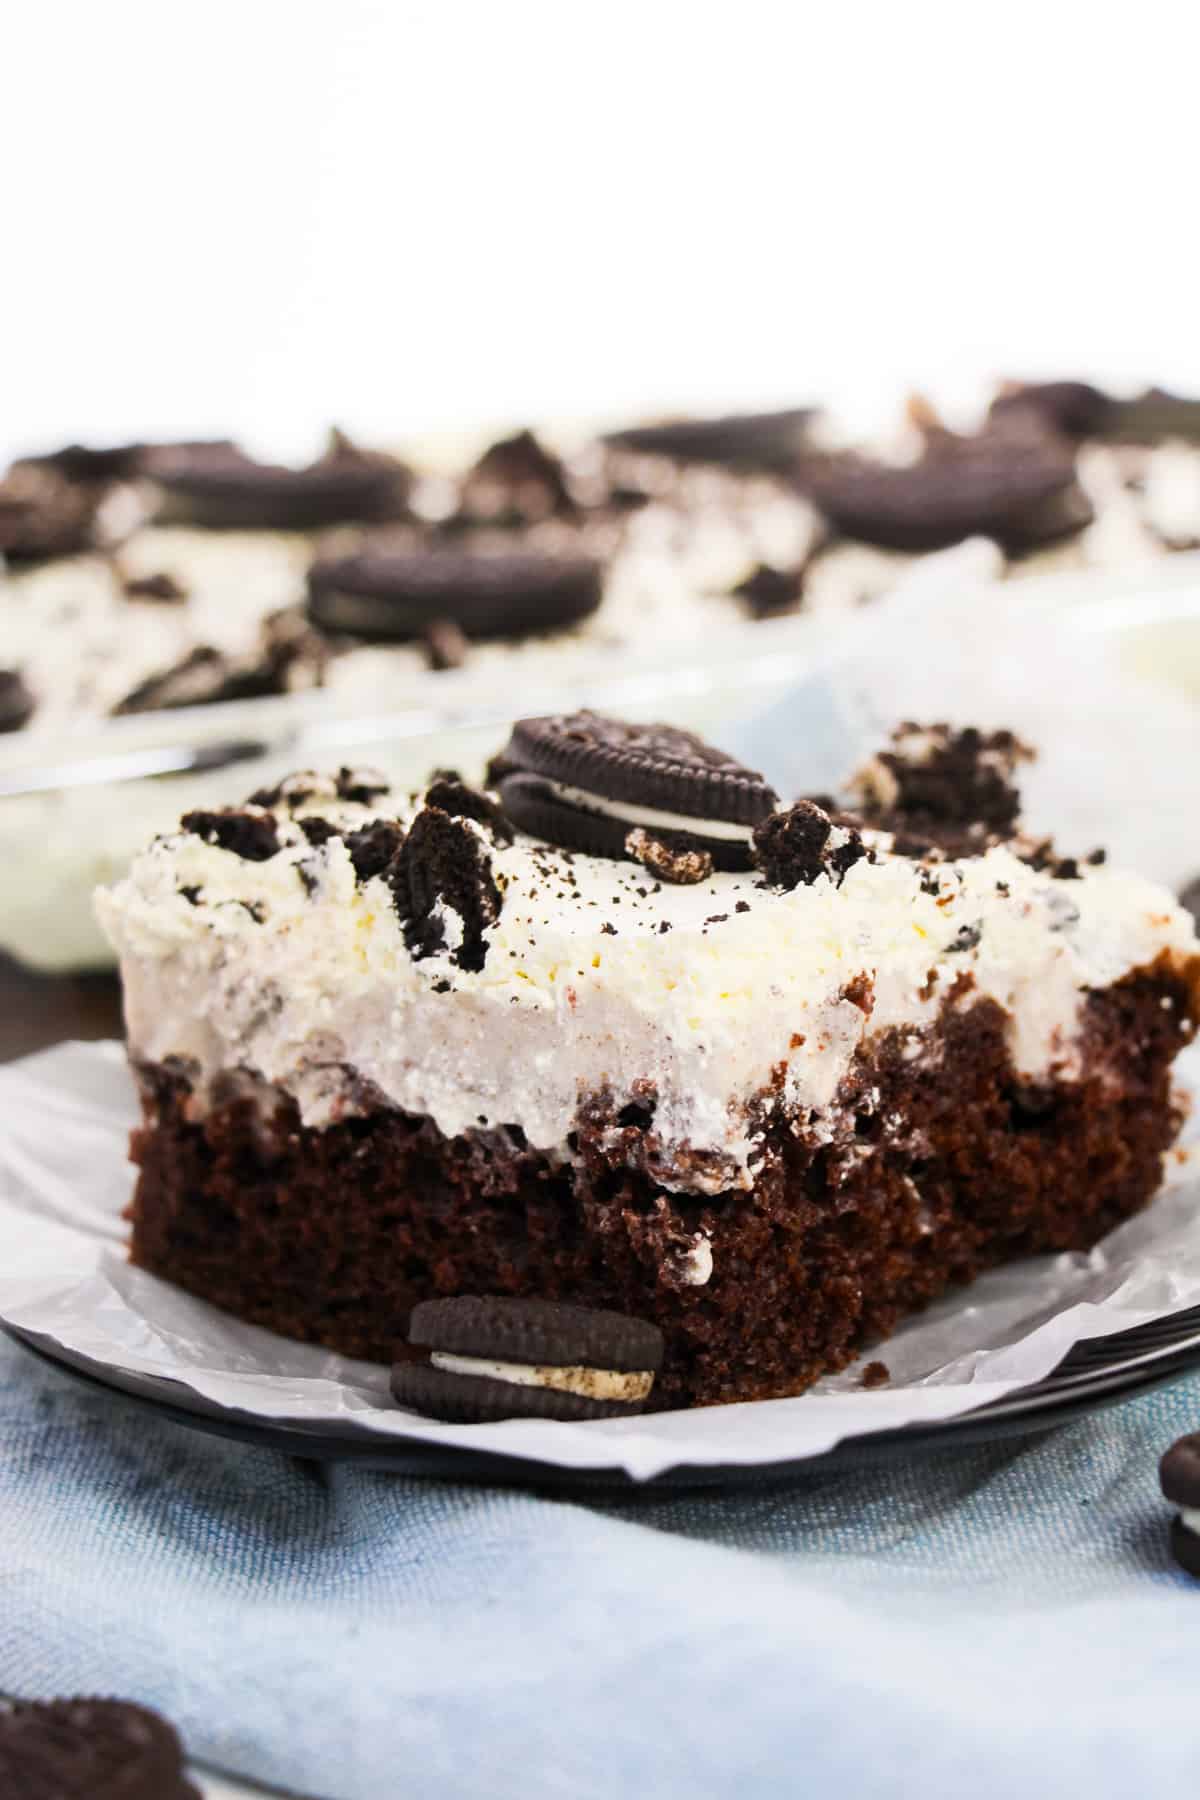 Plate slice of OREO cookie chocolate cake with Cool Whip topping